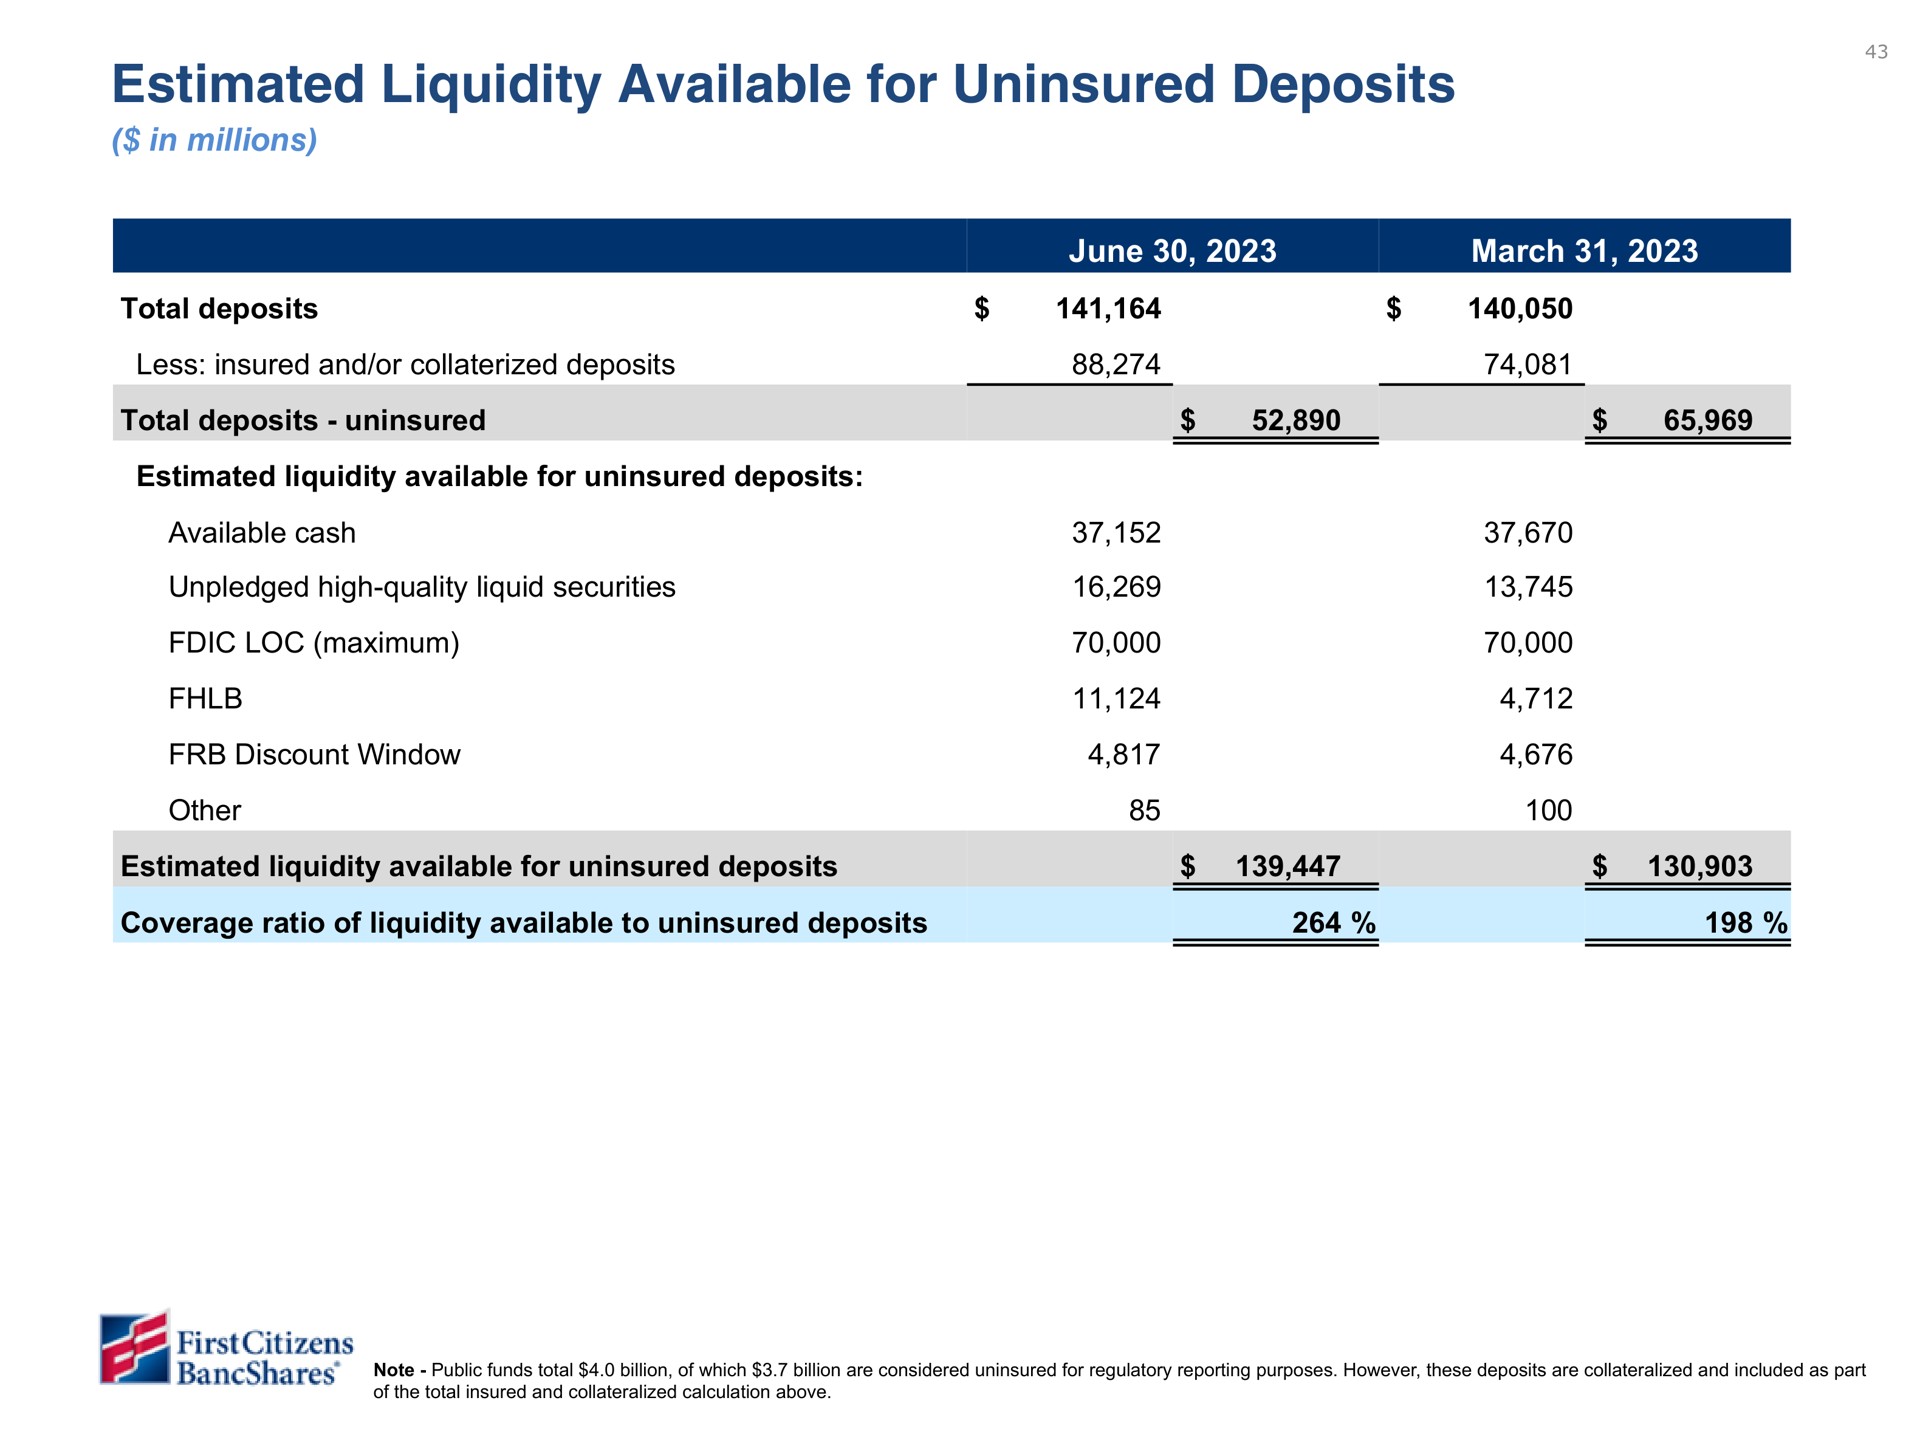 estimated liquidity available for uninsured deposits less insured and or deposits total deposits uninsured total deposits immediately available cash unpledged securities line of credit estimated liquidity available for uninsured deposits fed discount window program estimated liquidity available for uninsured deposits coverage ratio of liquidity available to uninsured and deposits | First Citizens BancShares